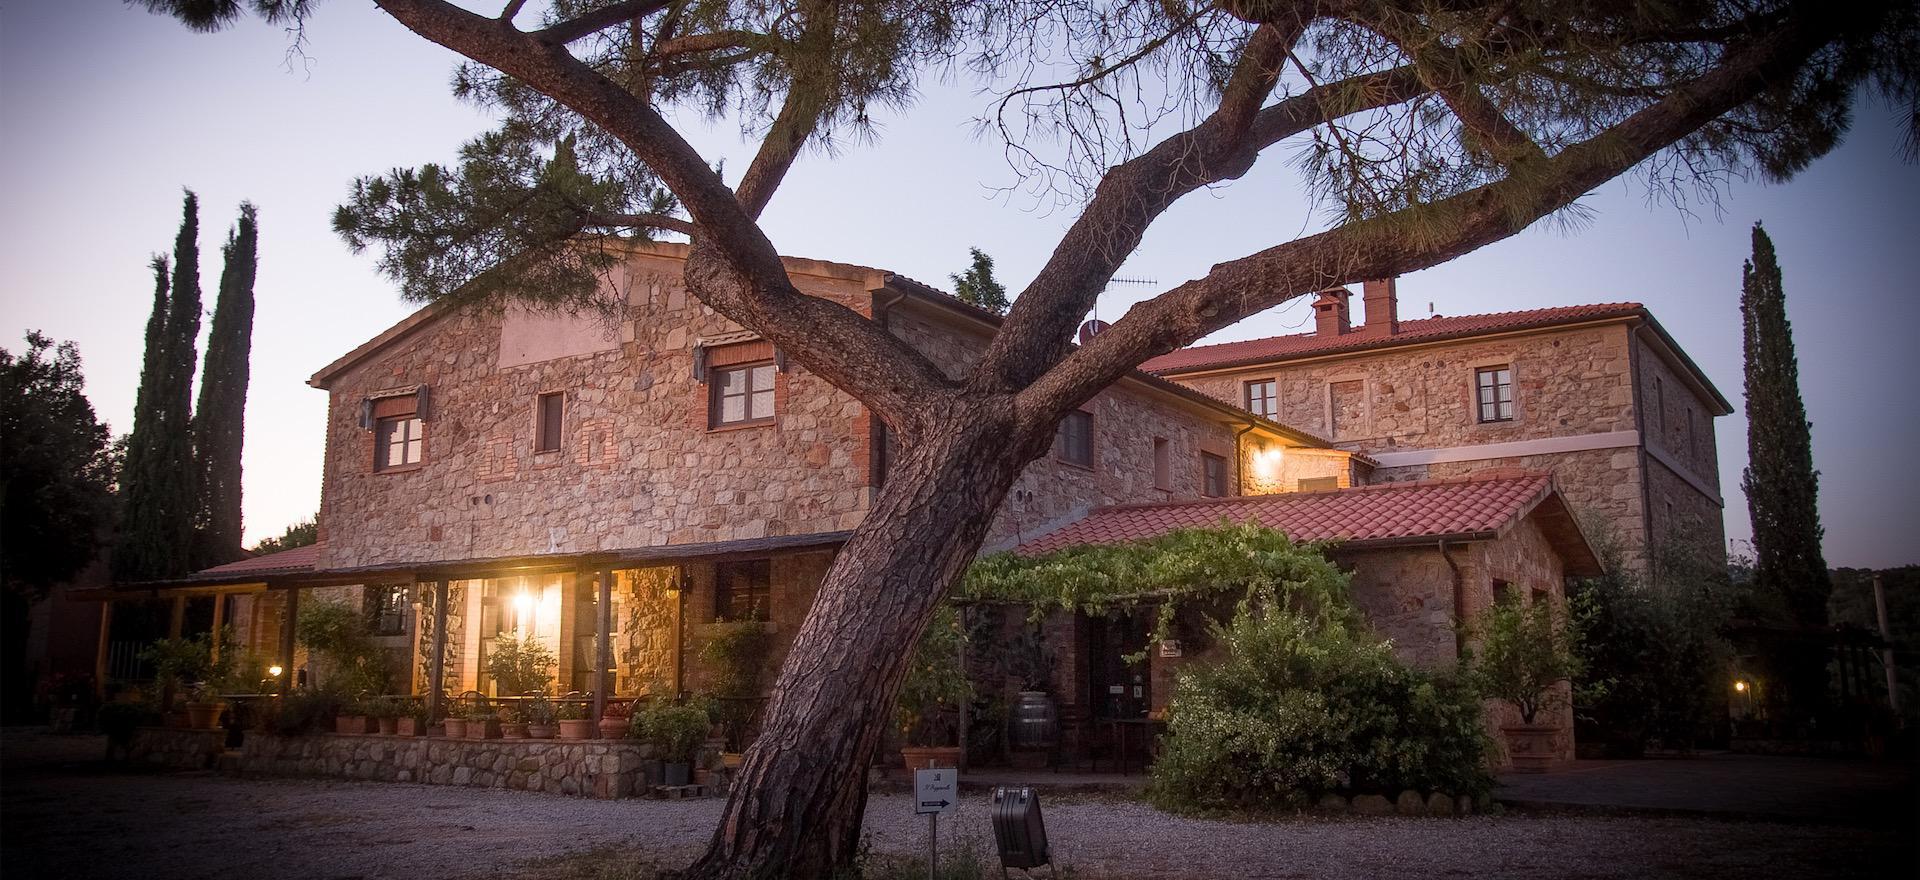 Agriturismo Tuscany Quietly situated agriturismo in Tuscany with friendly owners